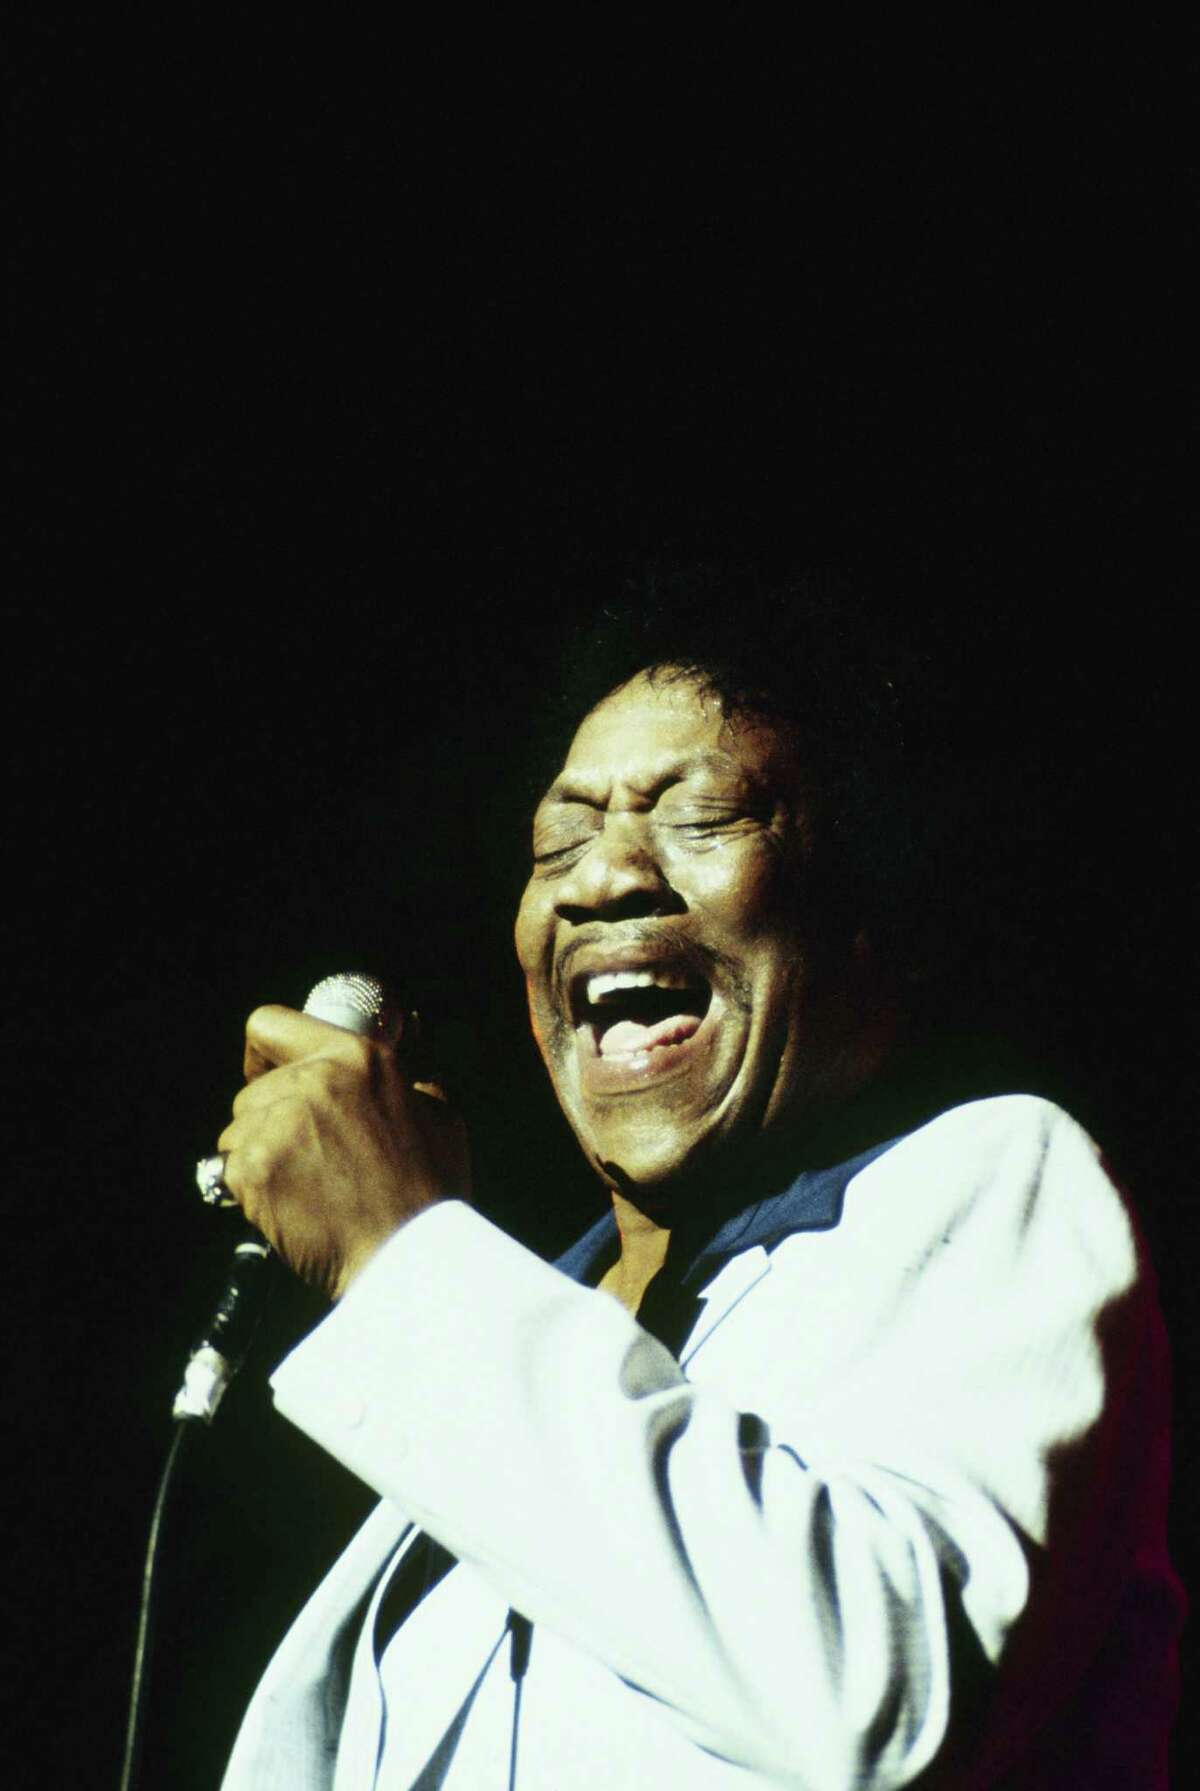 Singer Bobby Blue Bland performs on stage at the Hammersmith Odeon in London, England on May 23, 1982.